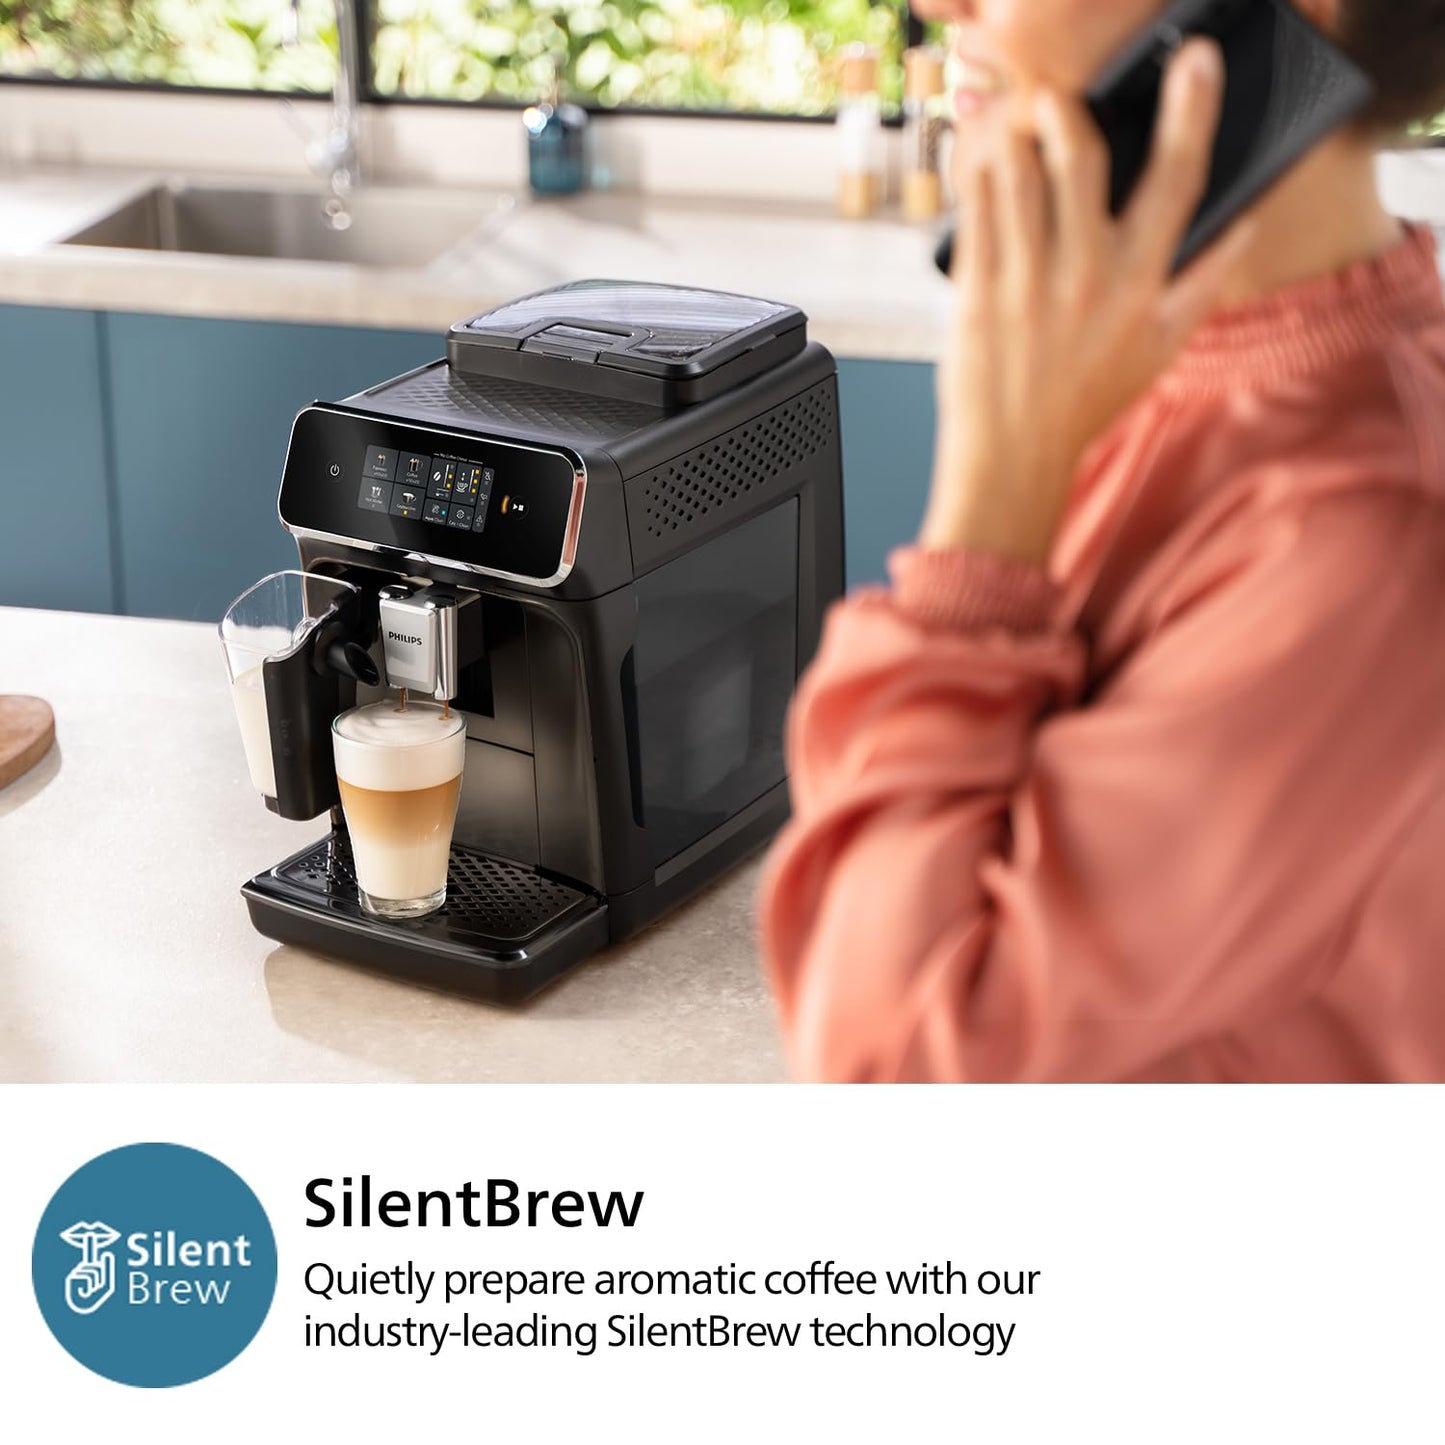 PHILIPS 2300 Series Fully Automatic Espresso Machine - 4 Beverages, Modern color touch screen display, LatteGo milk system, SilentBrew, 100% Ceramic Grinder, AquaClean Filter. Matte Black (EP2330/10)